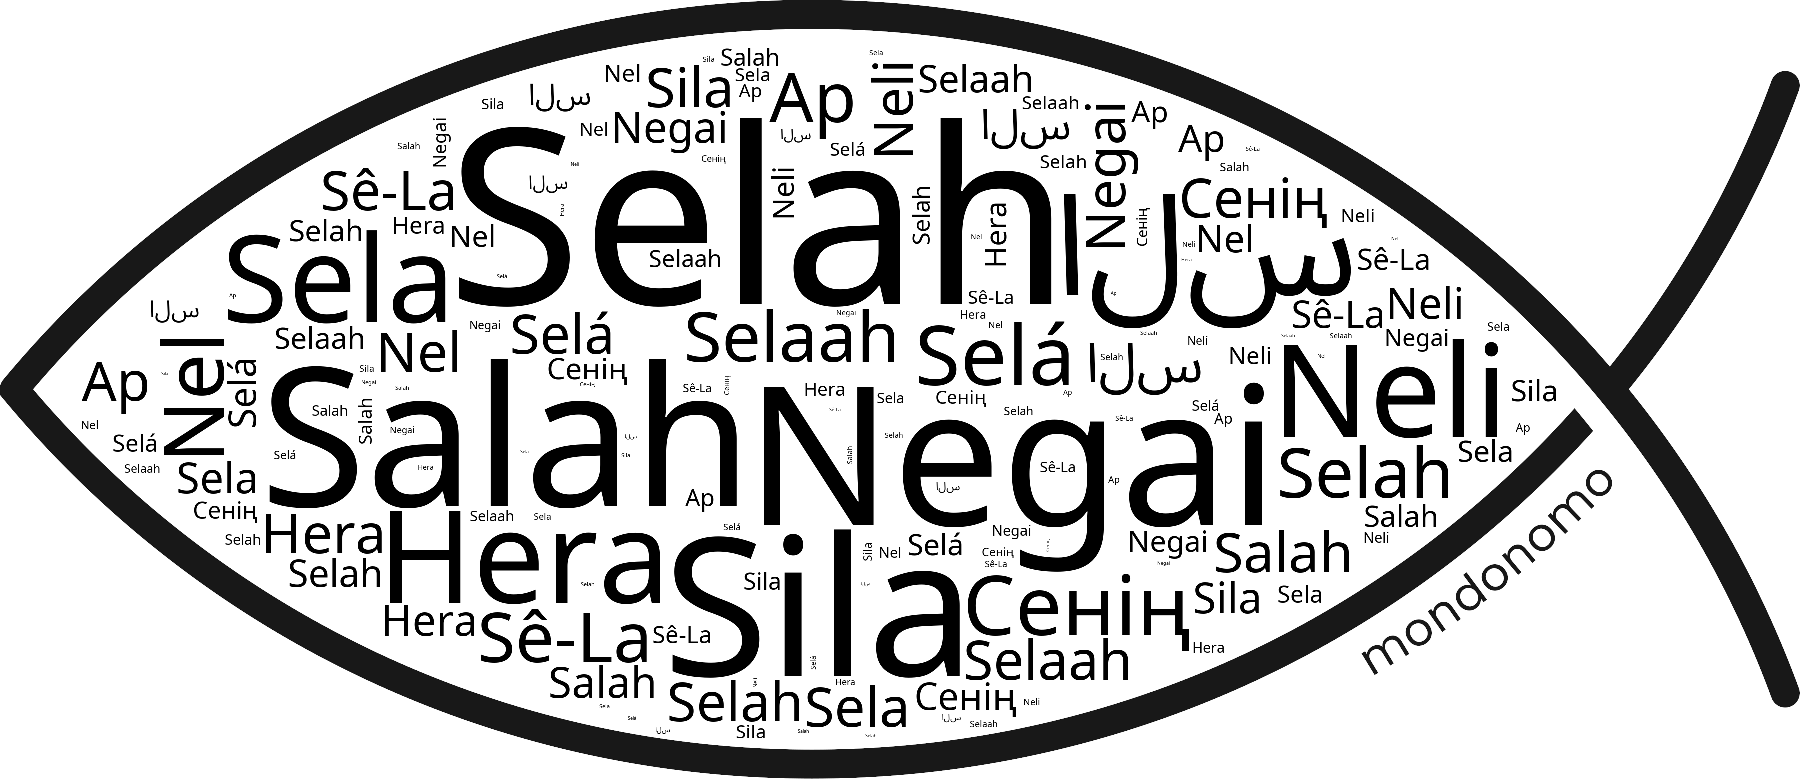 Name Selah in the world's Bibles